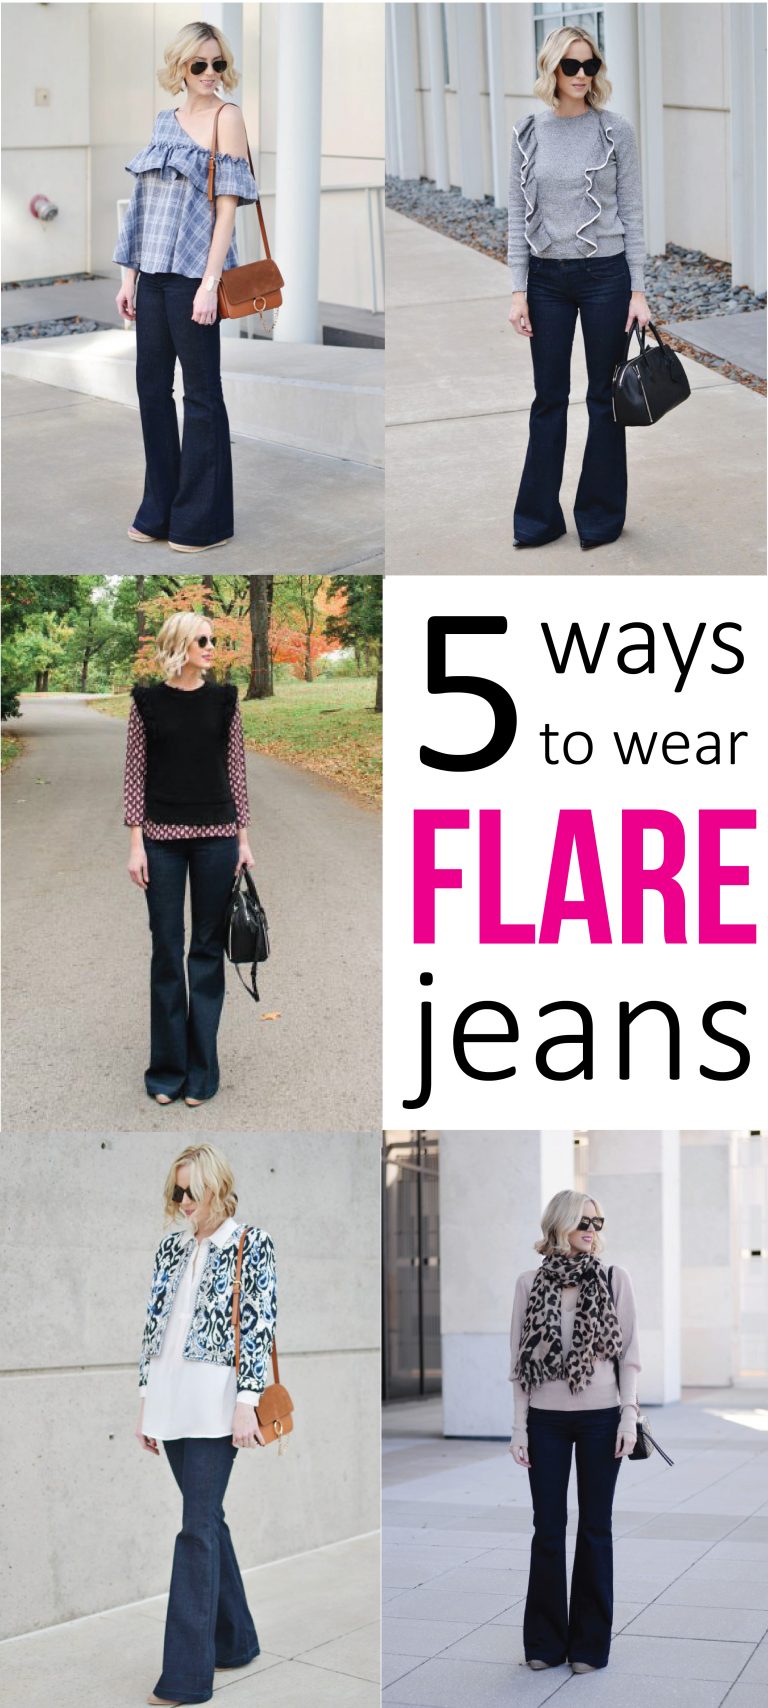 A Closet Staple - 5 Ways to Wear Flare Jeans + Link Up - Straight A Style